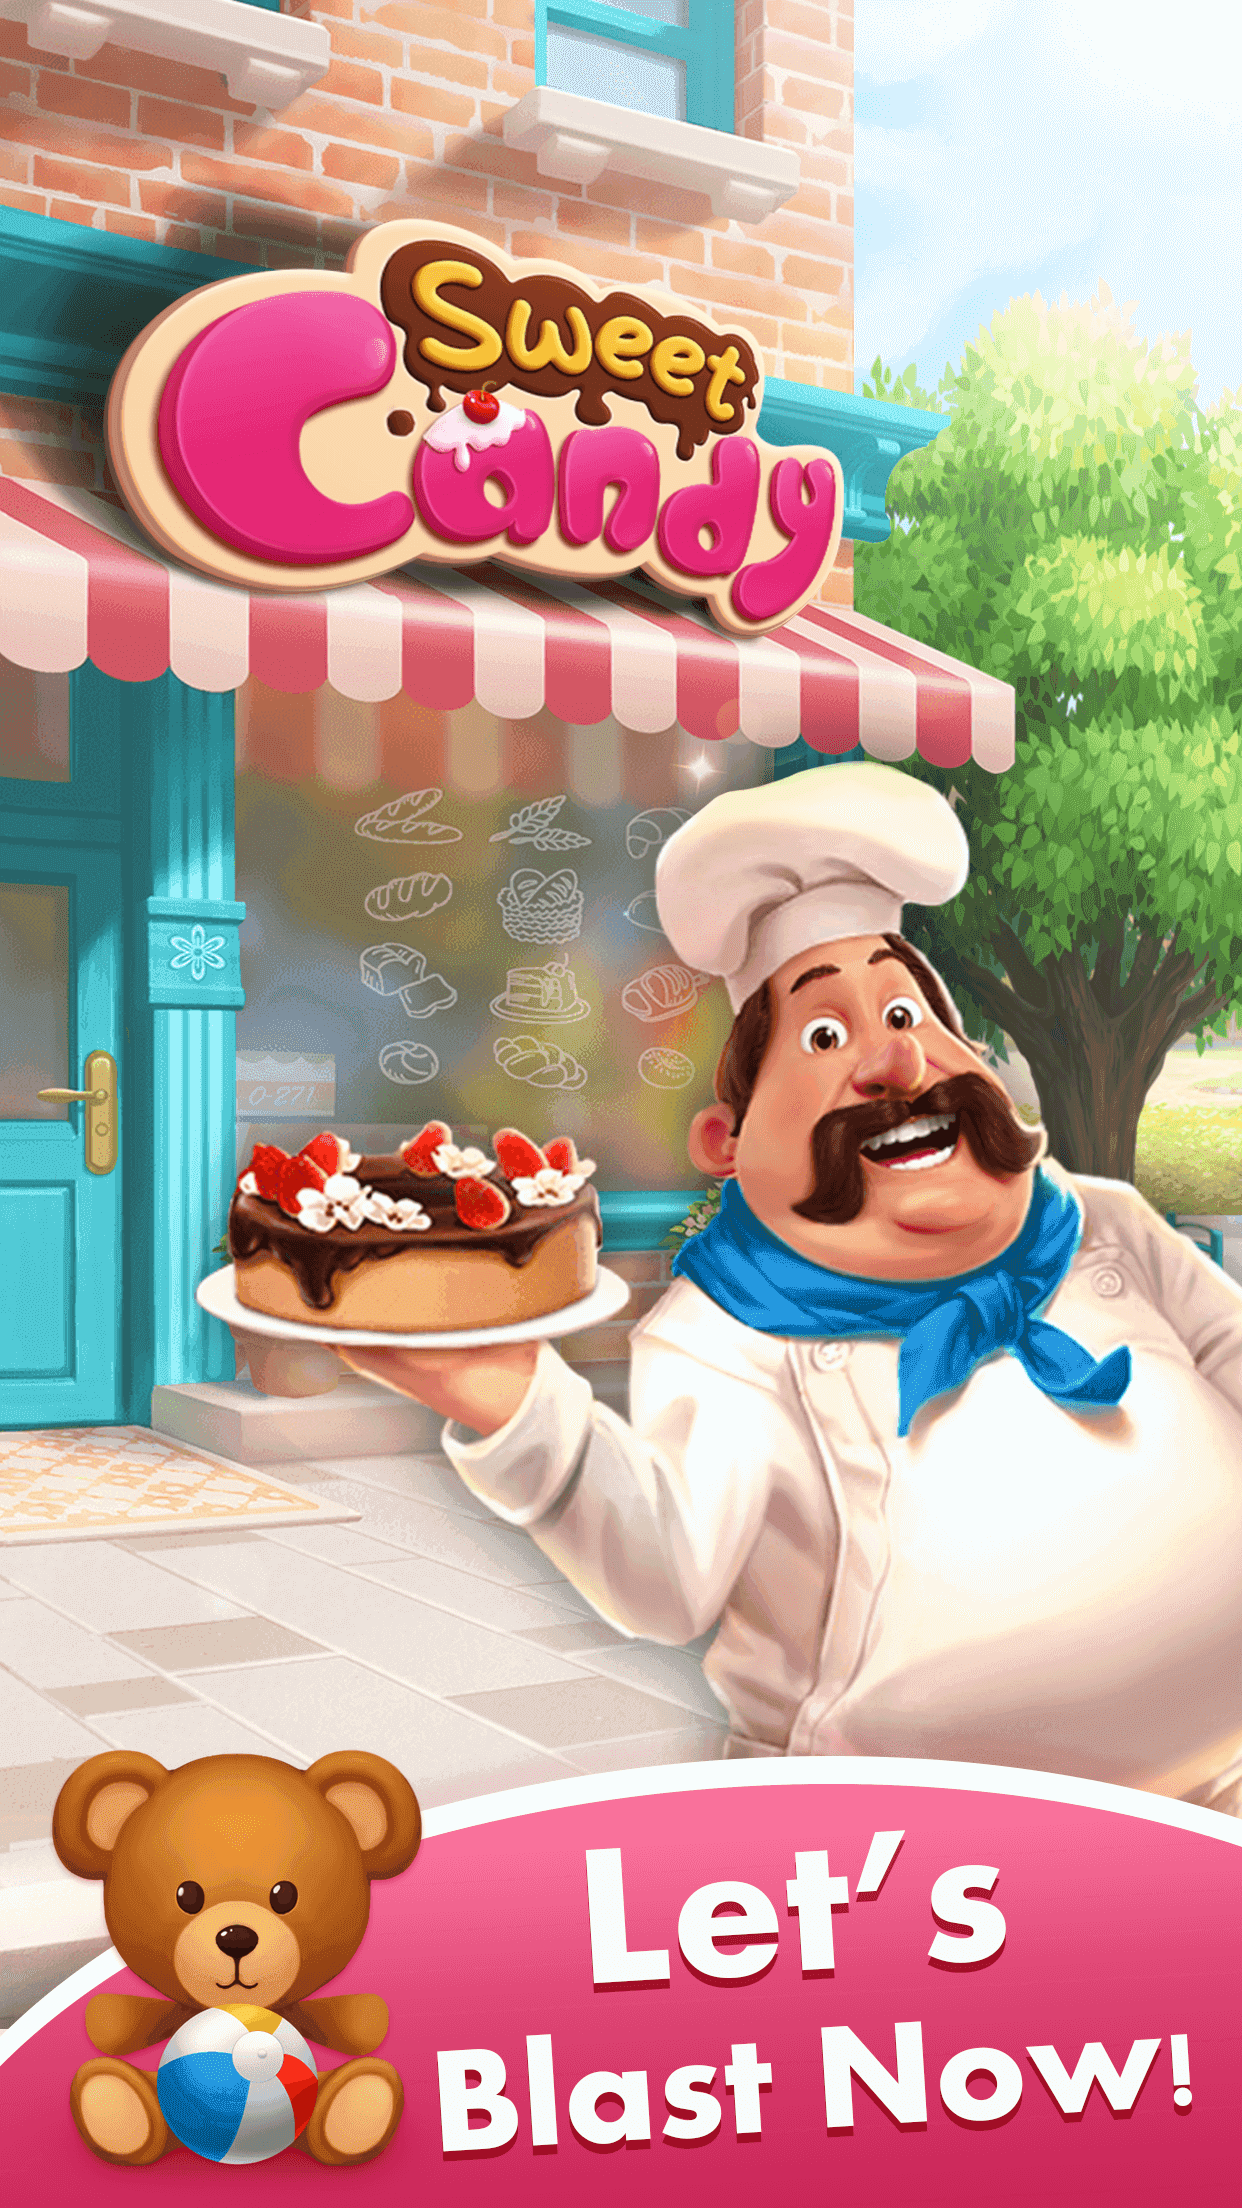 Screenshot 1 of Sweet Candy Fever-Free Match 3 Puzzle игра 1.0.7